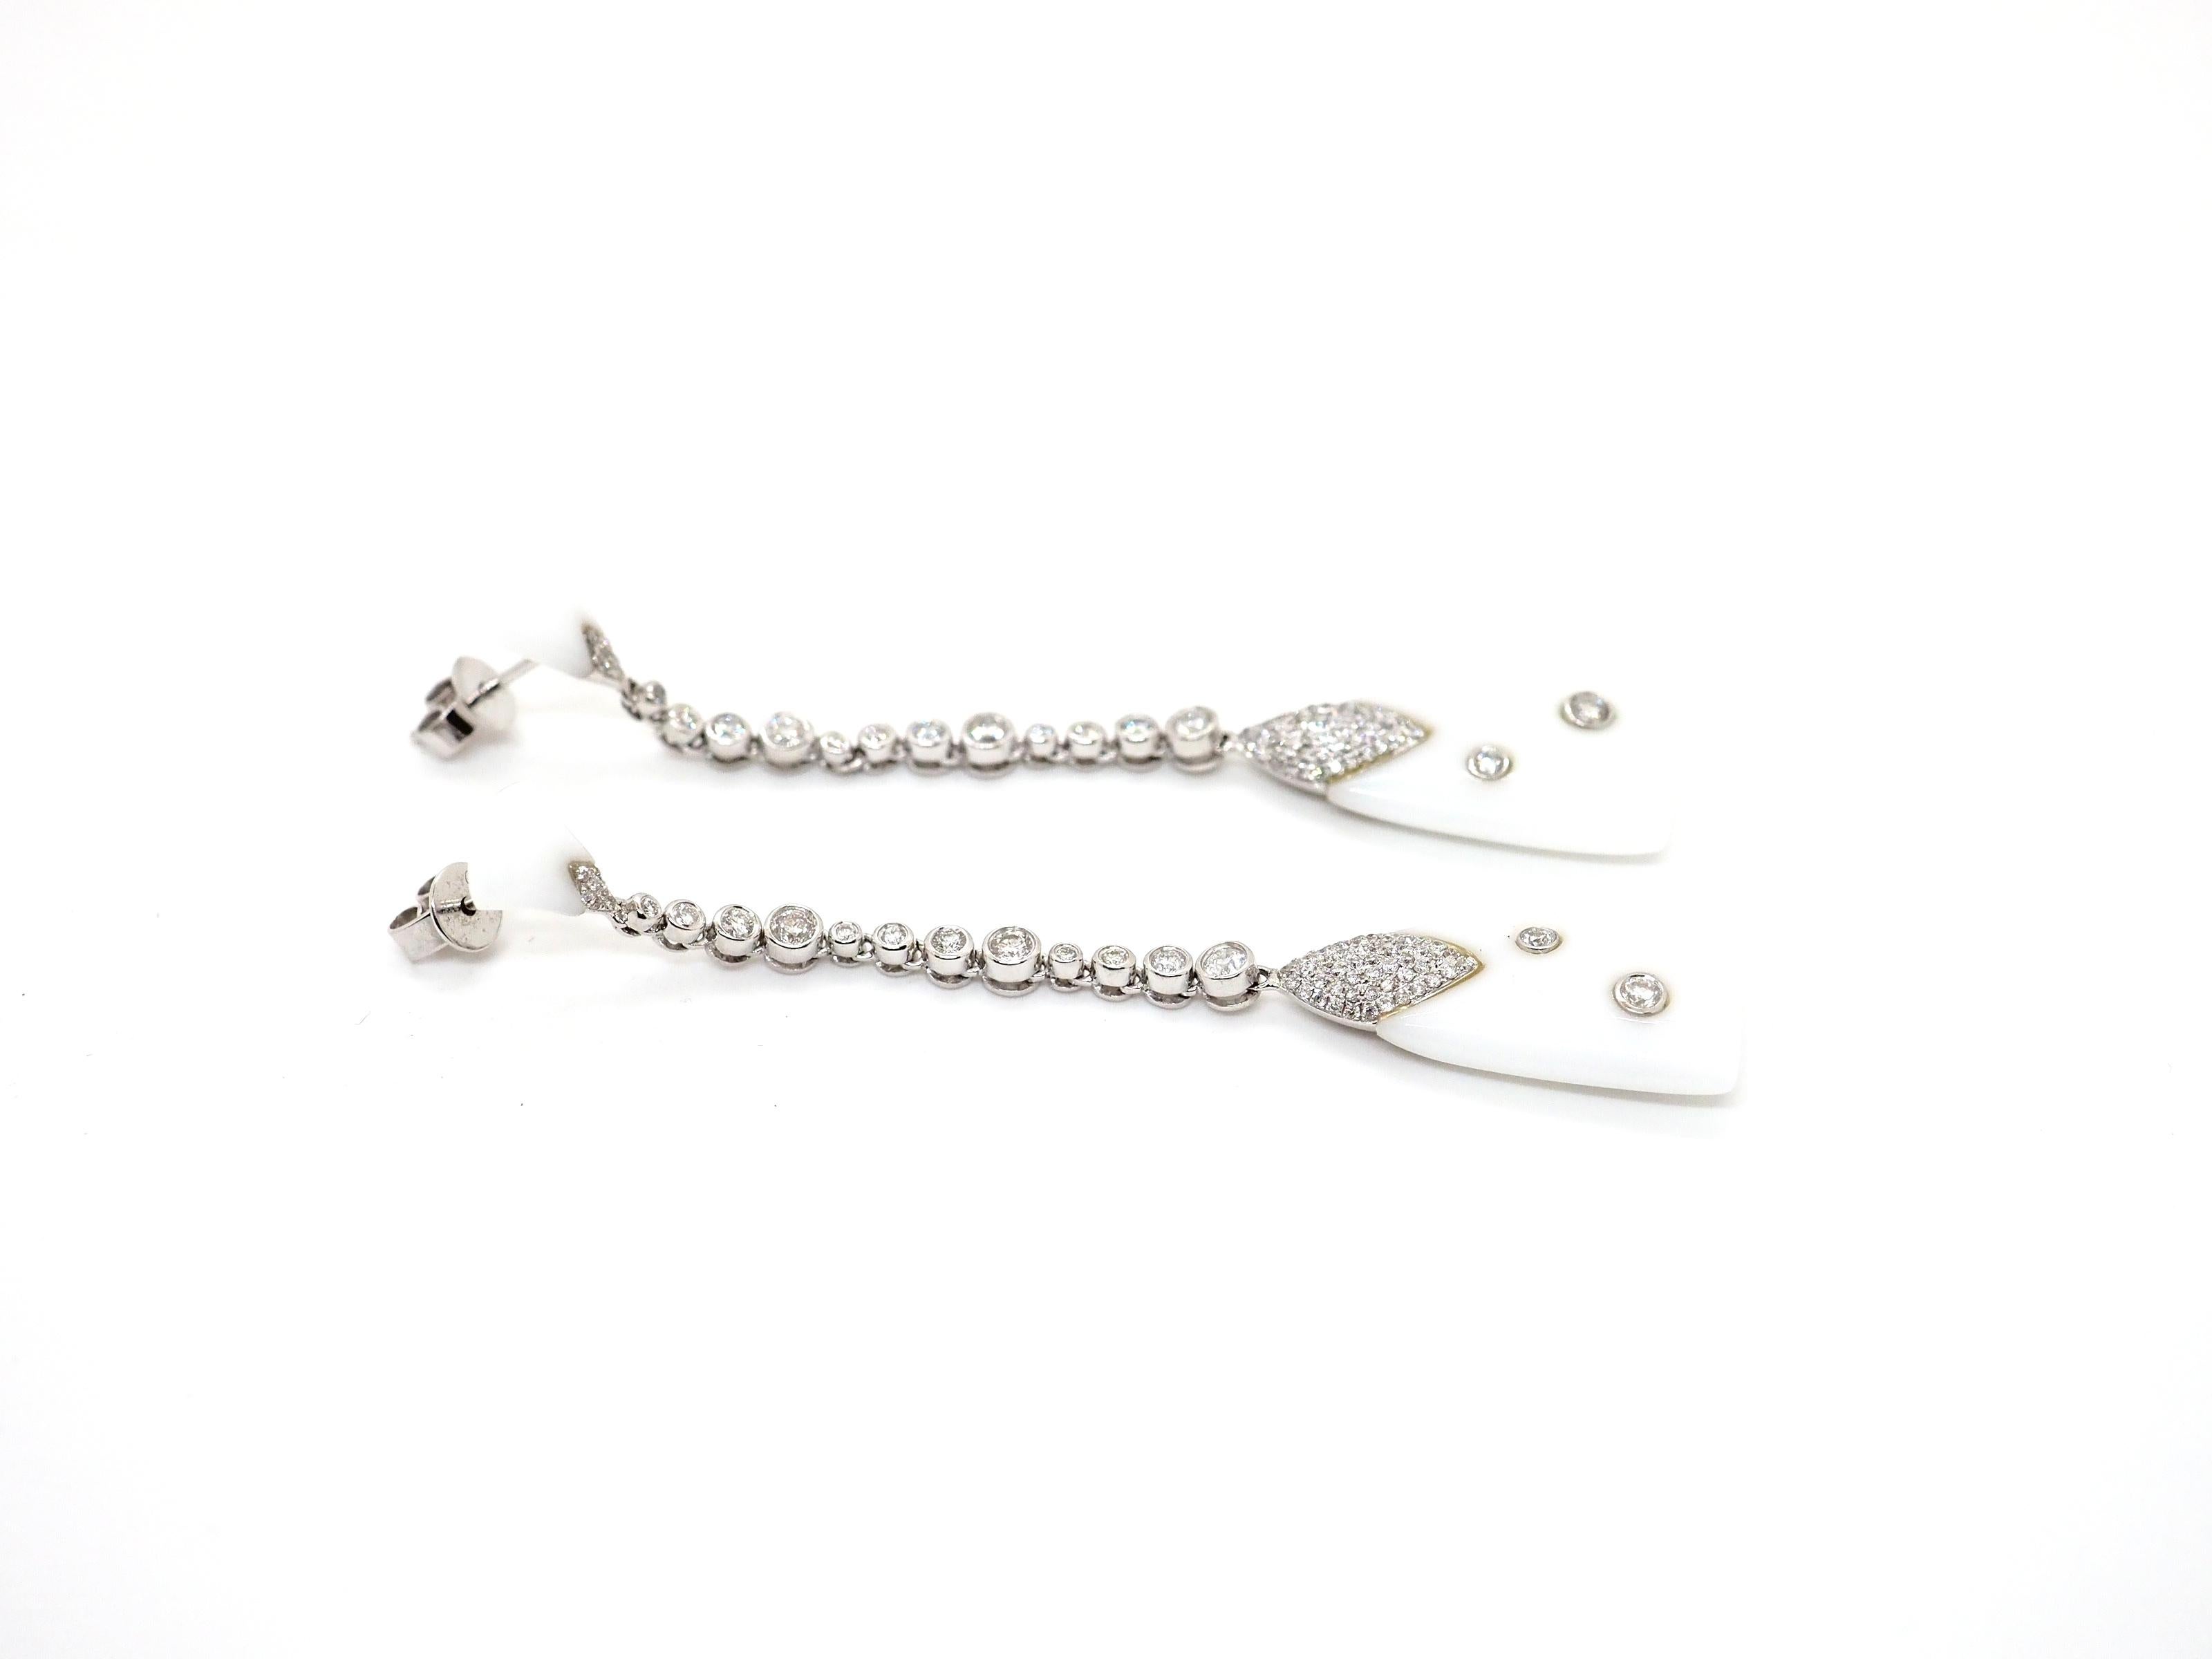 Step into the allure of vintage glamour with these exquisite drop earrings crafted in 18K white gold. Adorned with rare white agate and sparkling round diamonds of varying sizes, totaling approximately 1 carat, these earrings are a true testament to